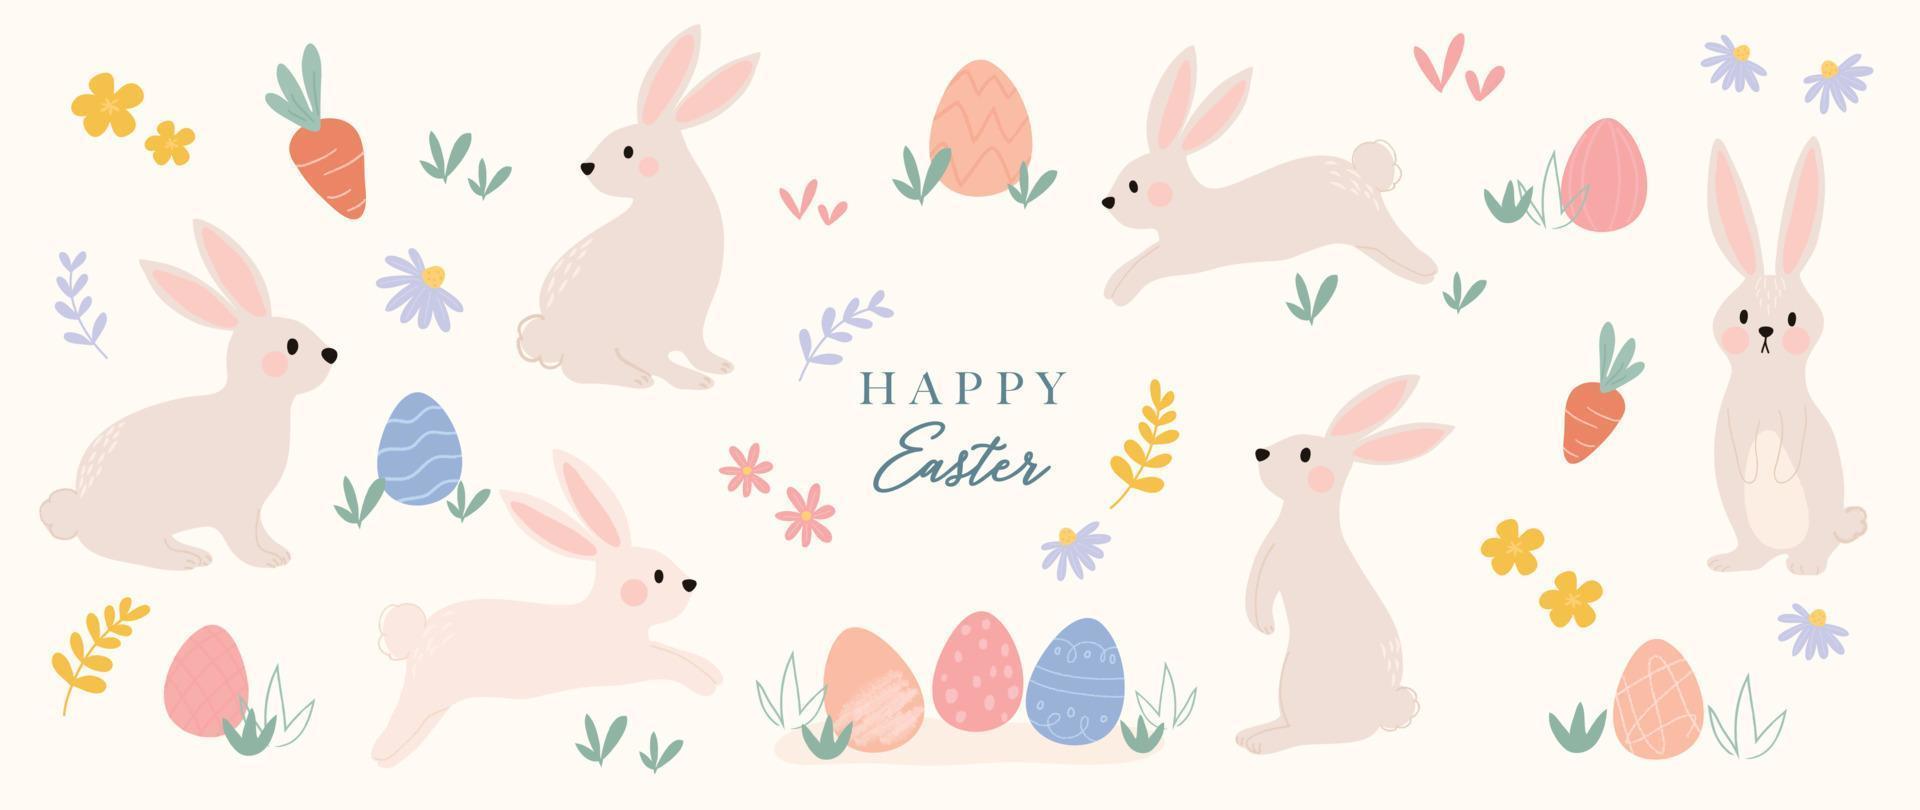 Happy Easter comic element vector set. Hand drawn cute playful rabbit, easter eggs, spring flowers, leaf branch, carrot. Collection of doodle animal and adorable design for decorative, card, kids.